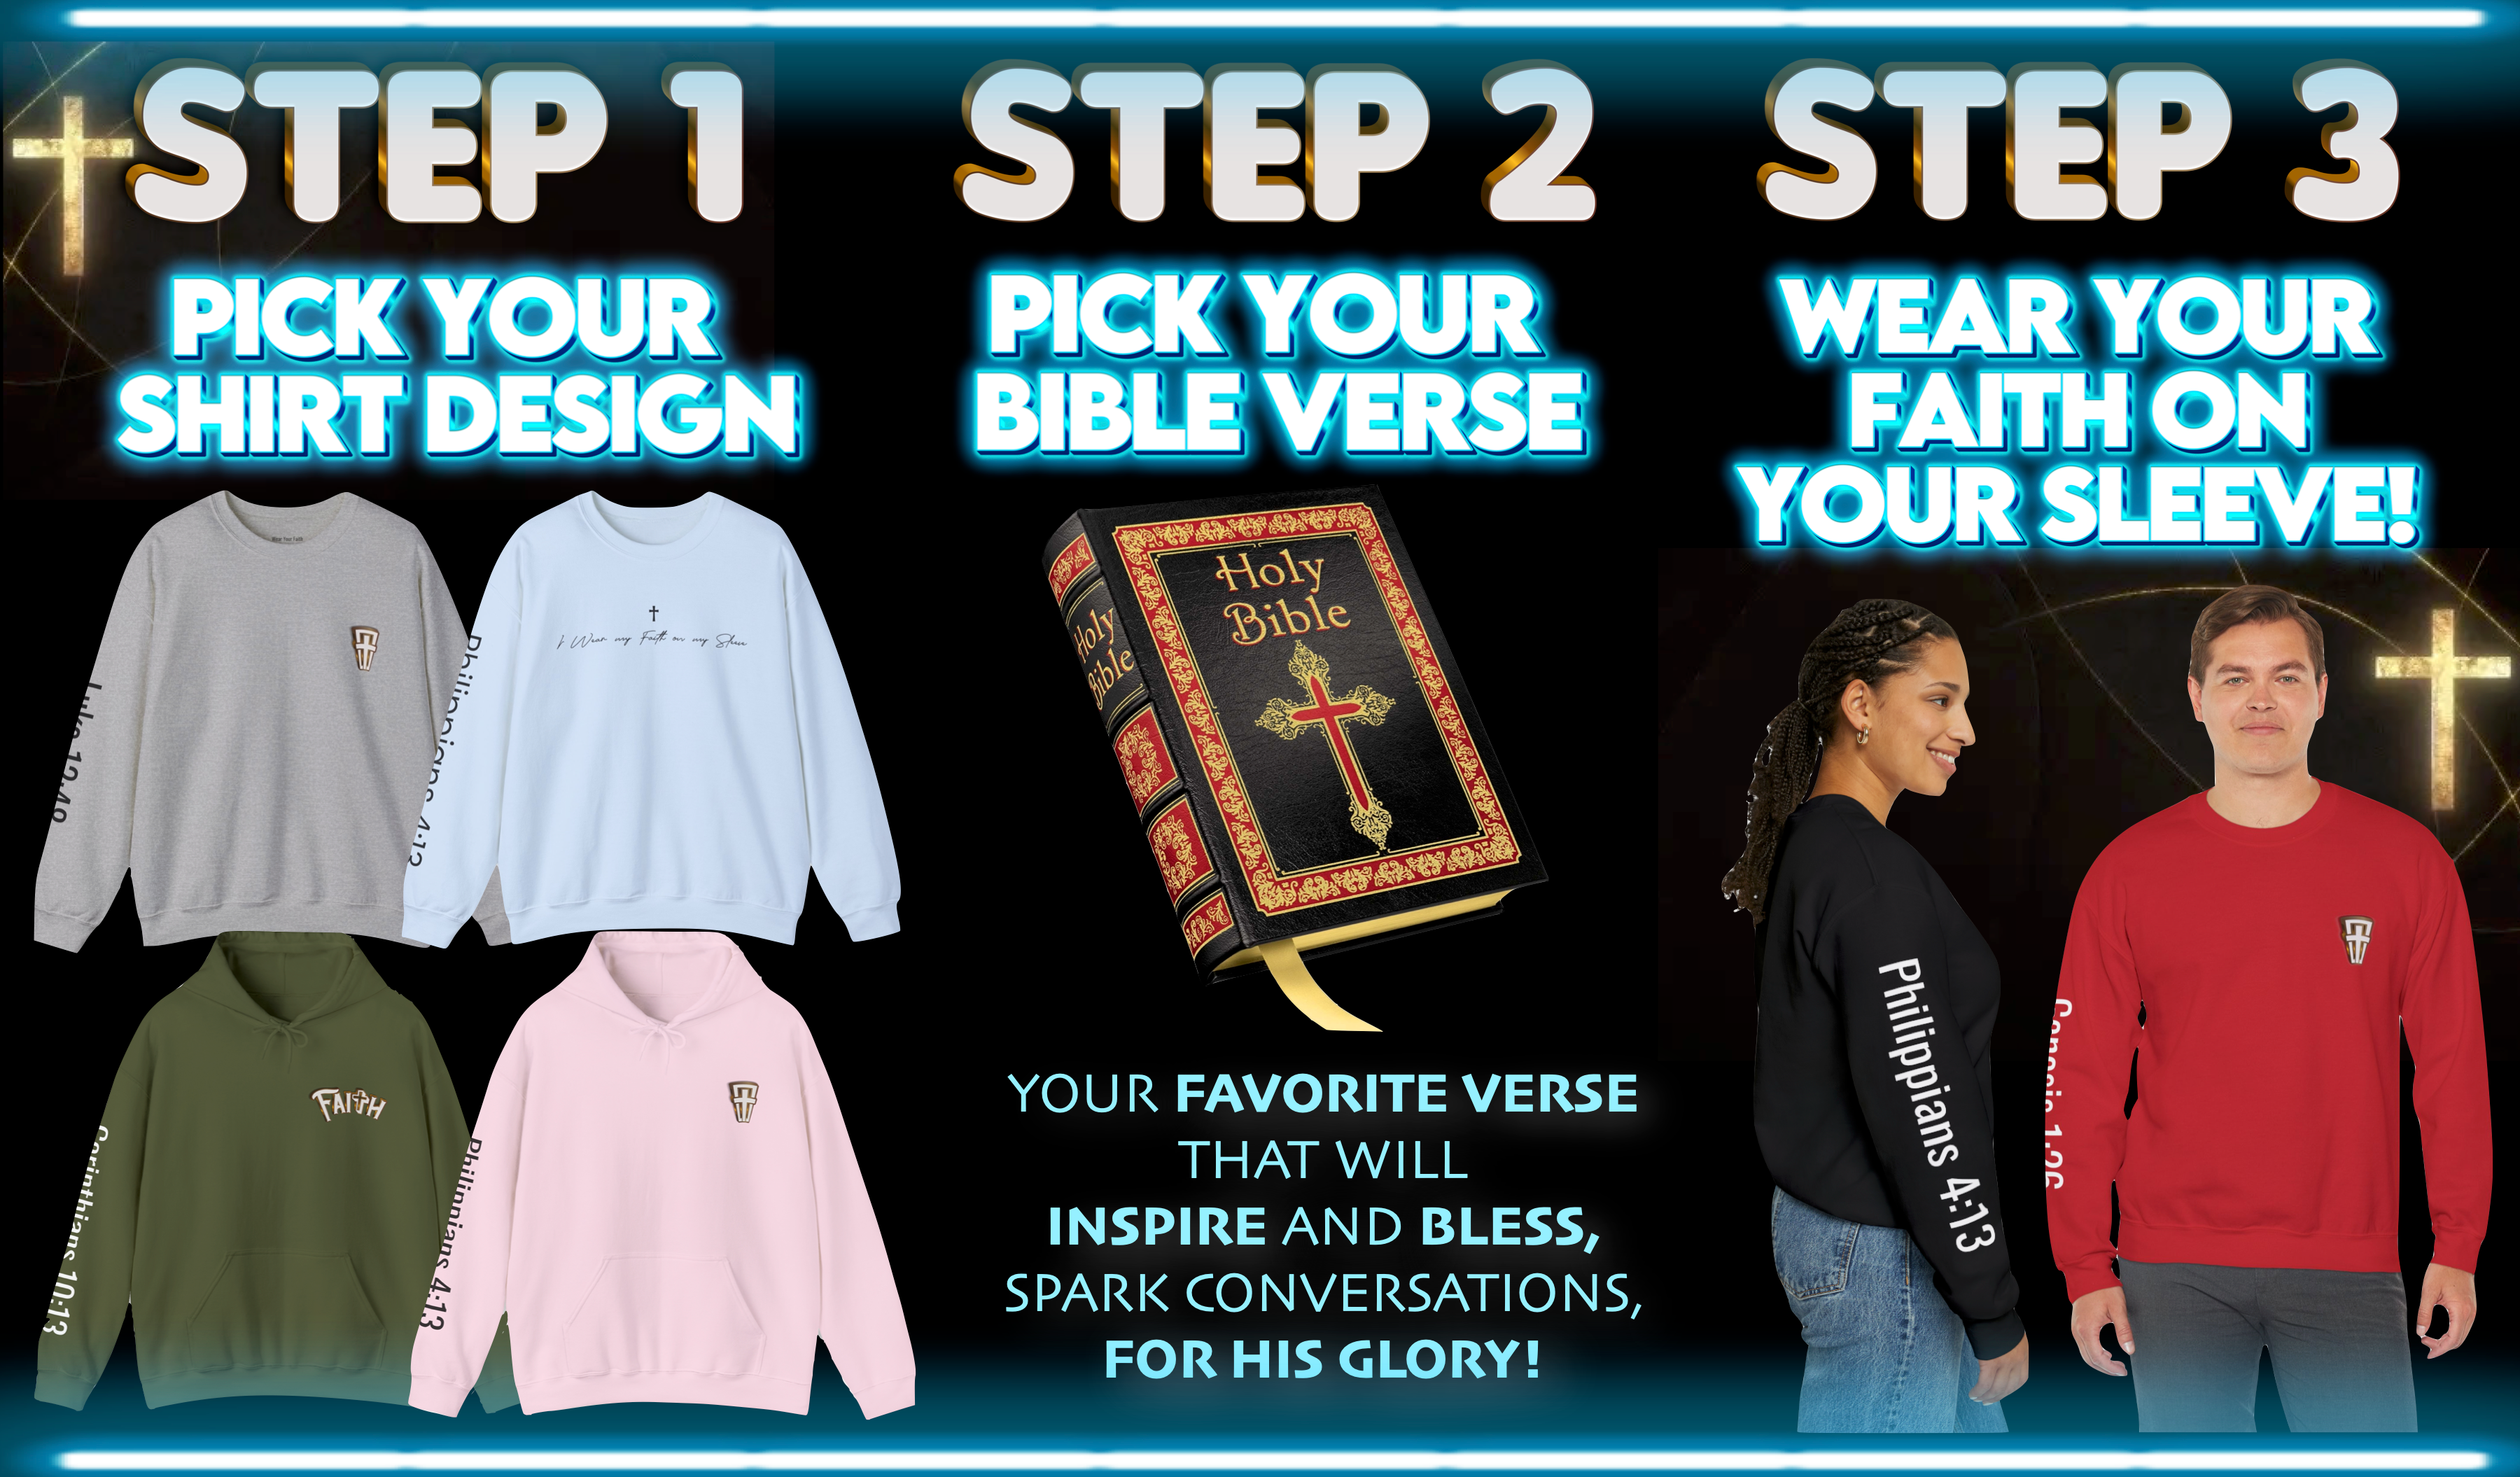 Christian Clothing. Wear Your Faith with Scripture on your Sleeve! Share God's Word and your Love of Jesus!